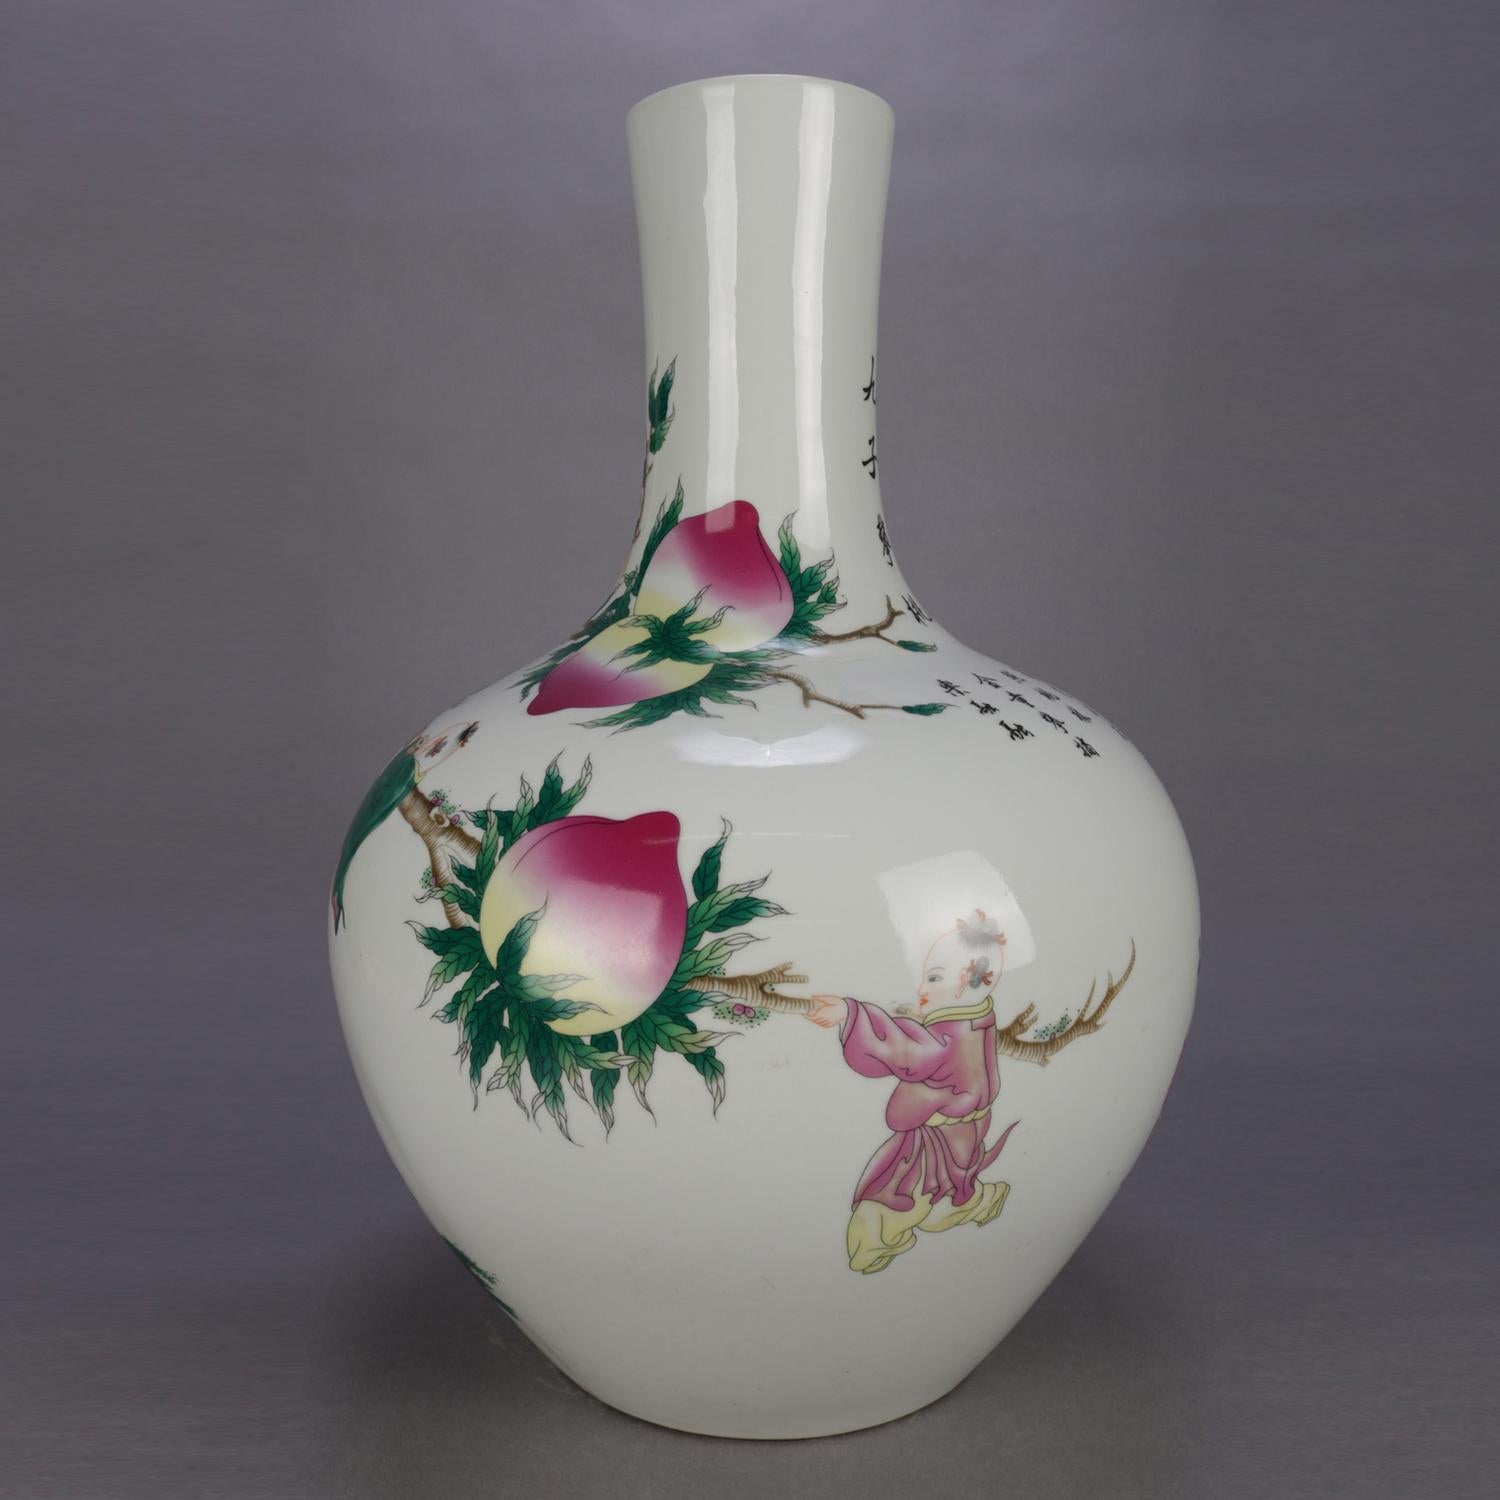 An oversized antique Chinese porcelain vase features bulbous form with countryside scene depicting children playing and tree climbing, en verso verbiage, stamp signed on base, 20th century.

Measures: 23